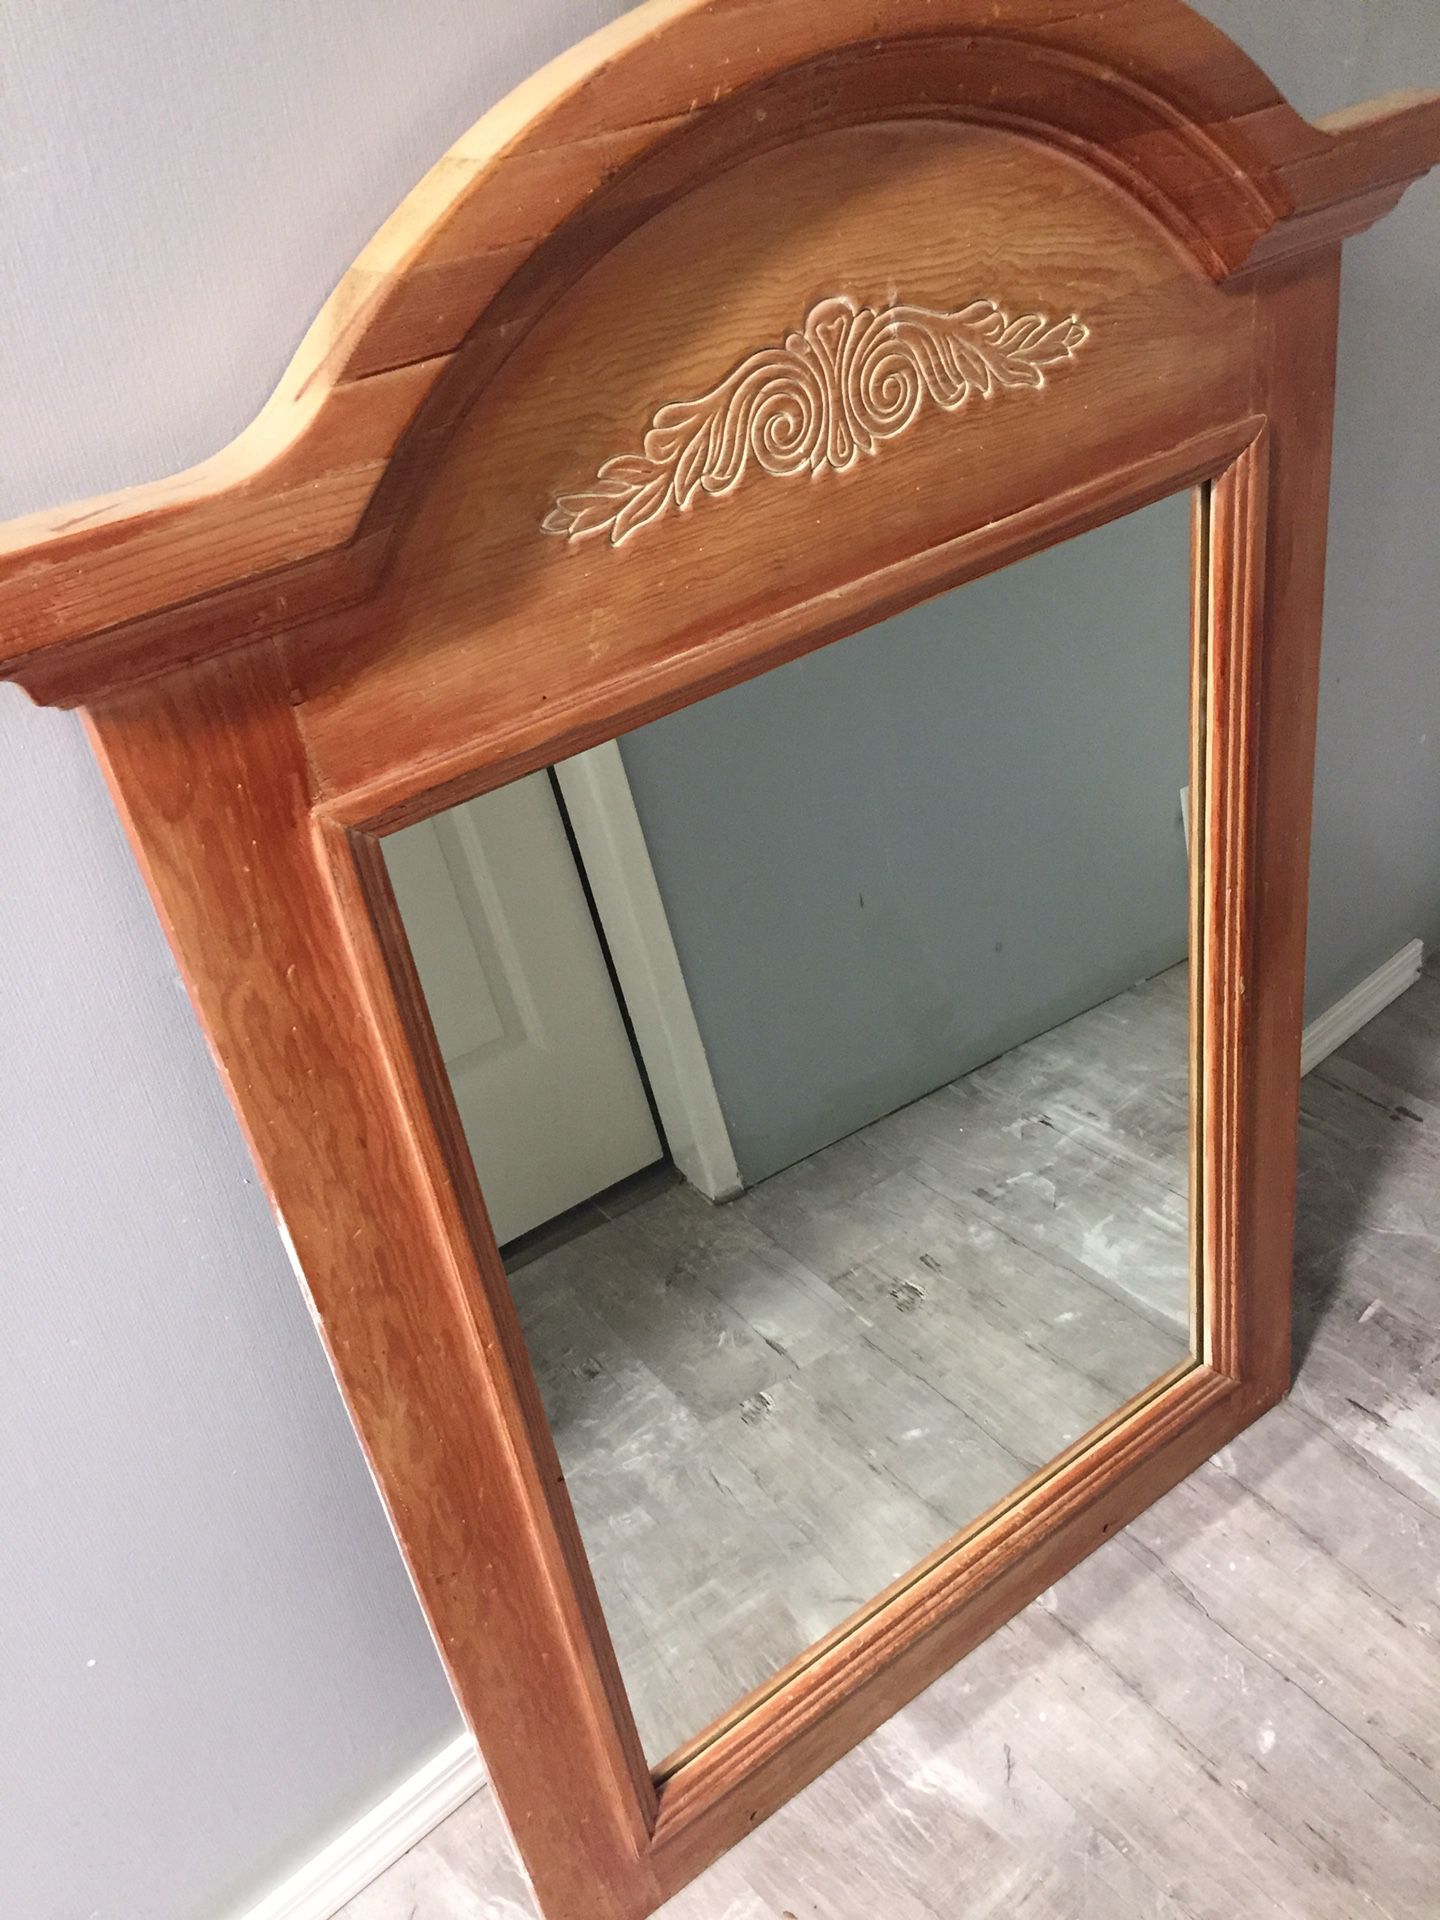 Wall Mirror - Made in Mexico.